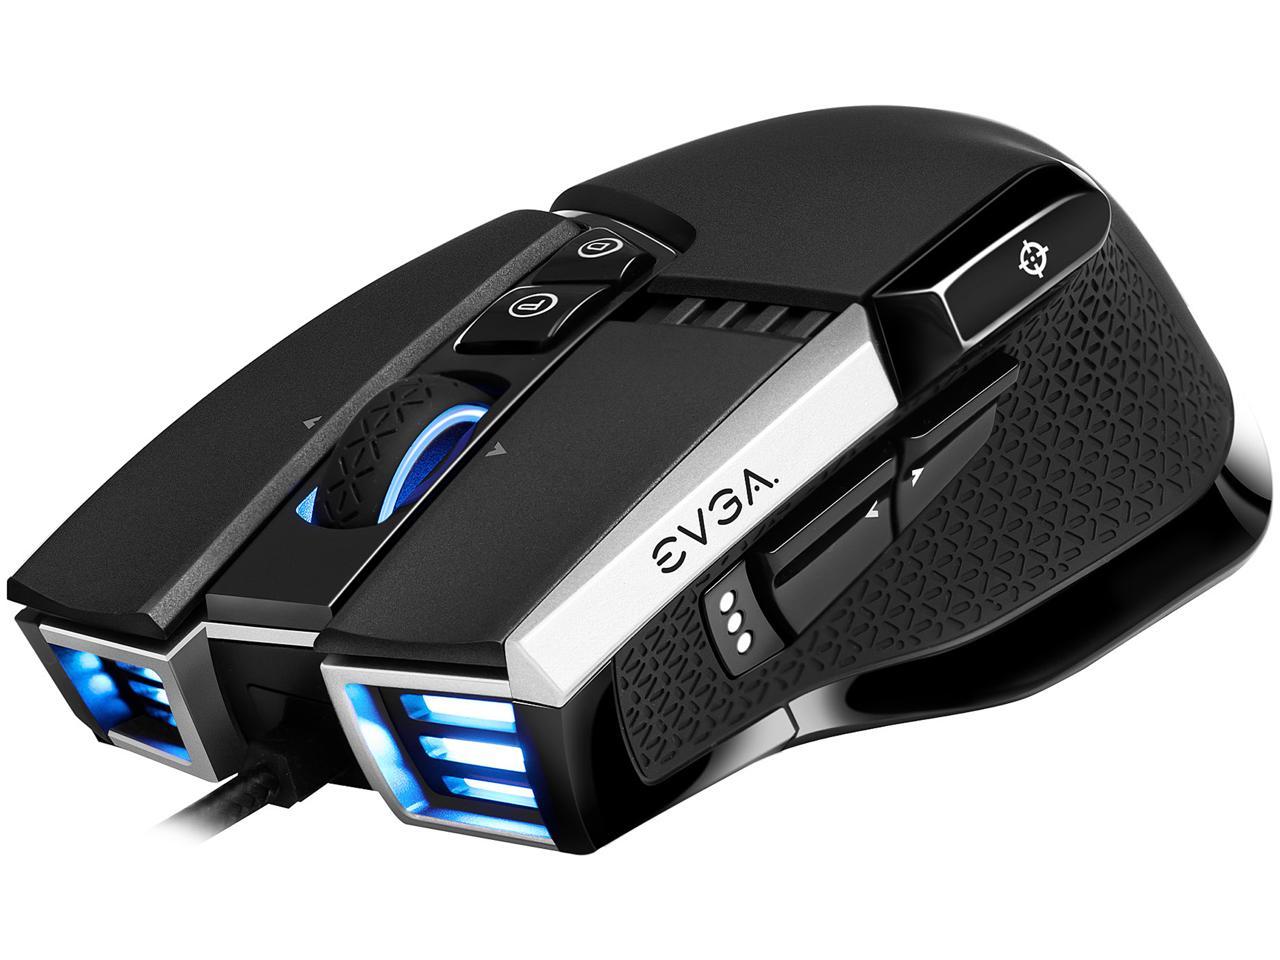 Gaming Mice FantasTech Deals EVGA X17 Gaming Mouse $17.99, TROPRO Programmable RGB $25.99 & More + Free shipping